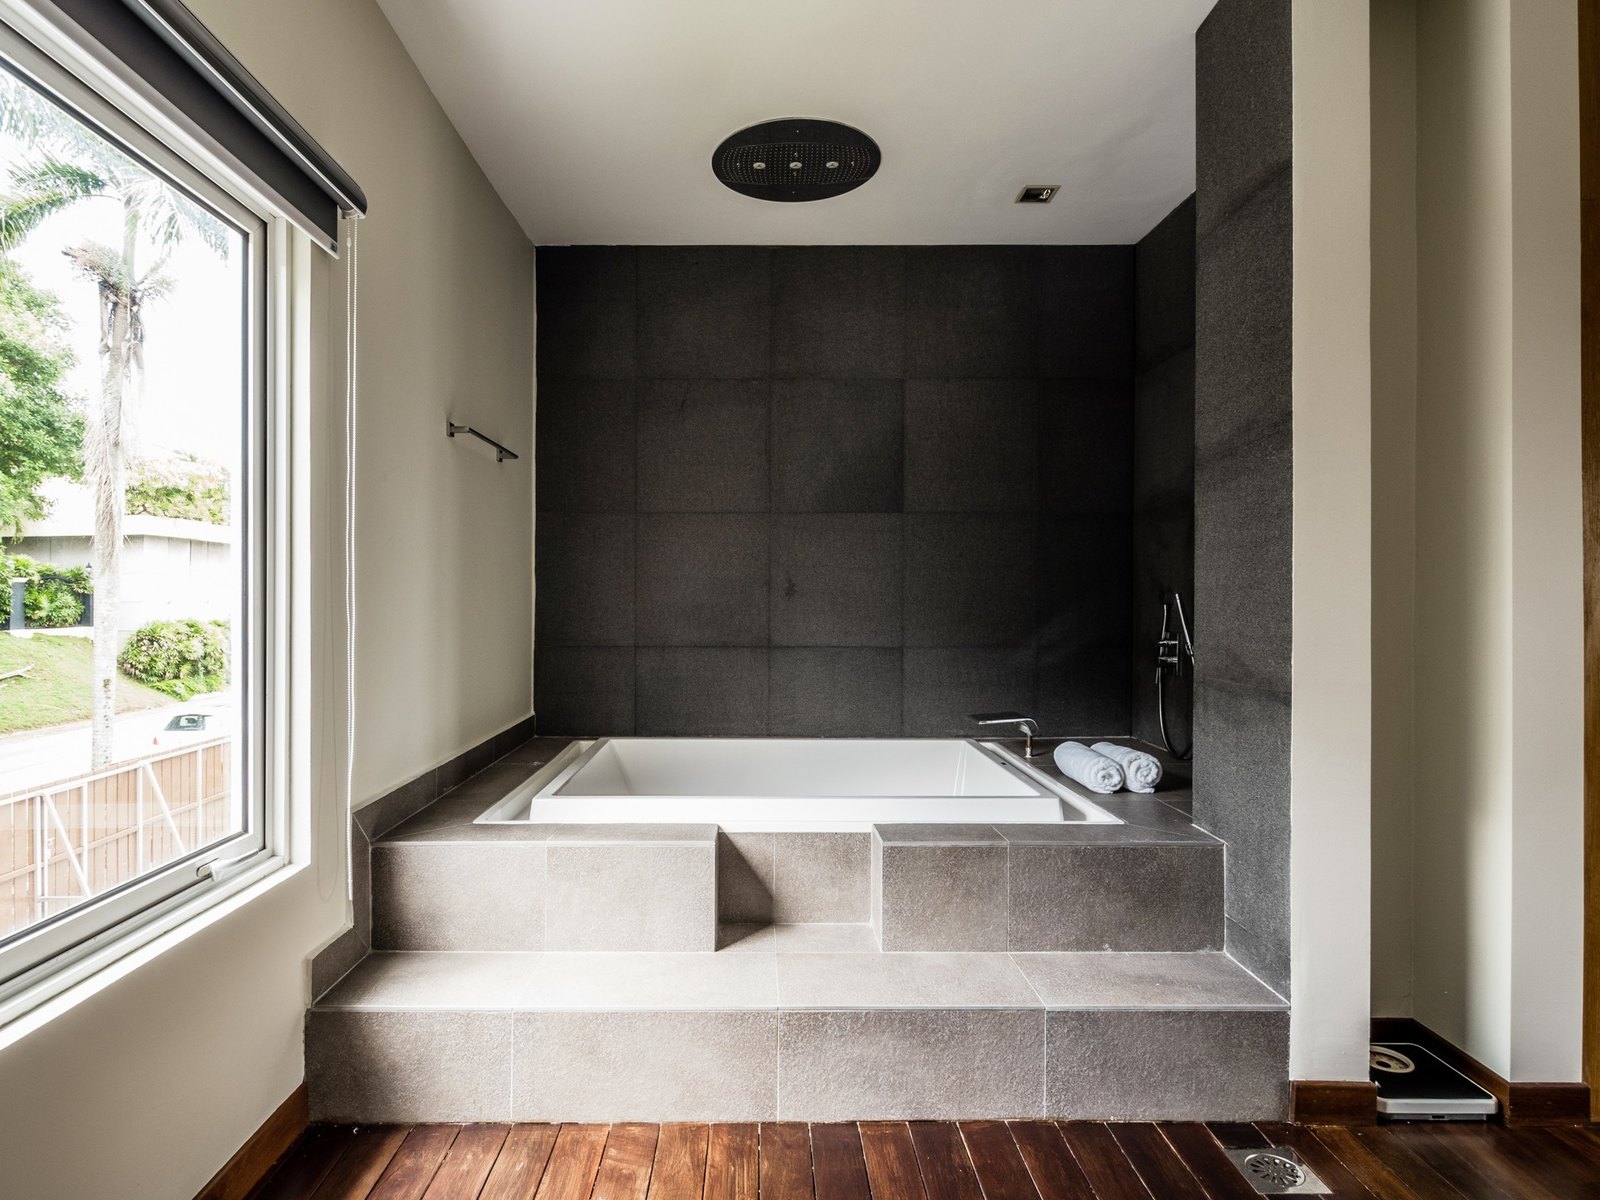 15 ways to create a stylish and luxurious bathroom design in your home ...